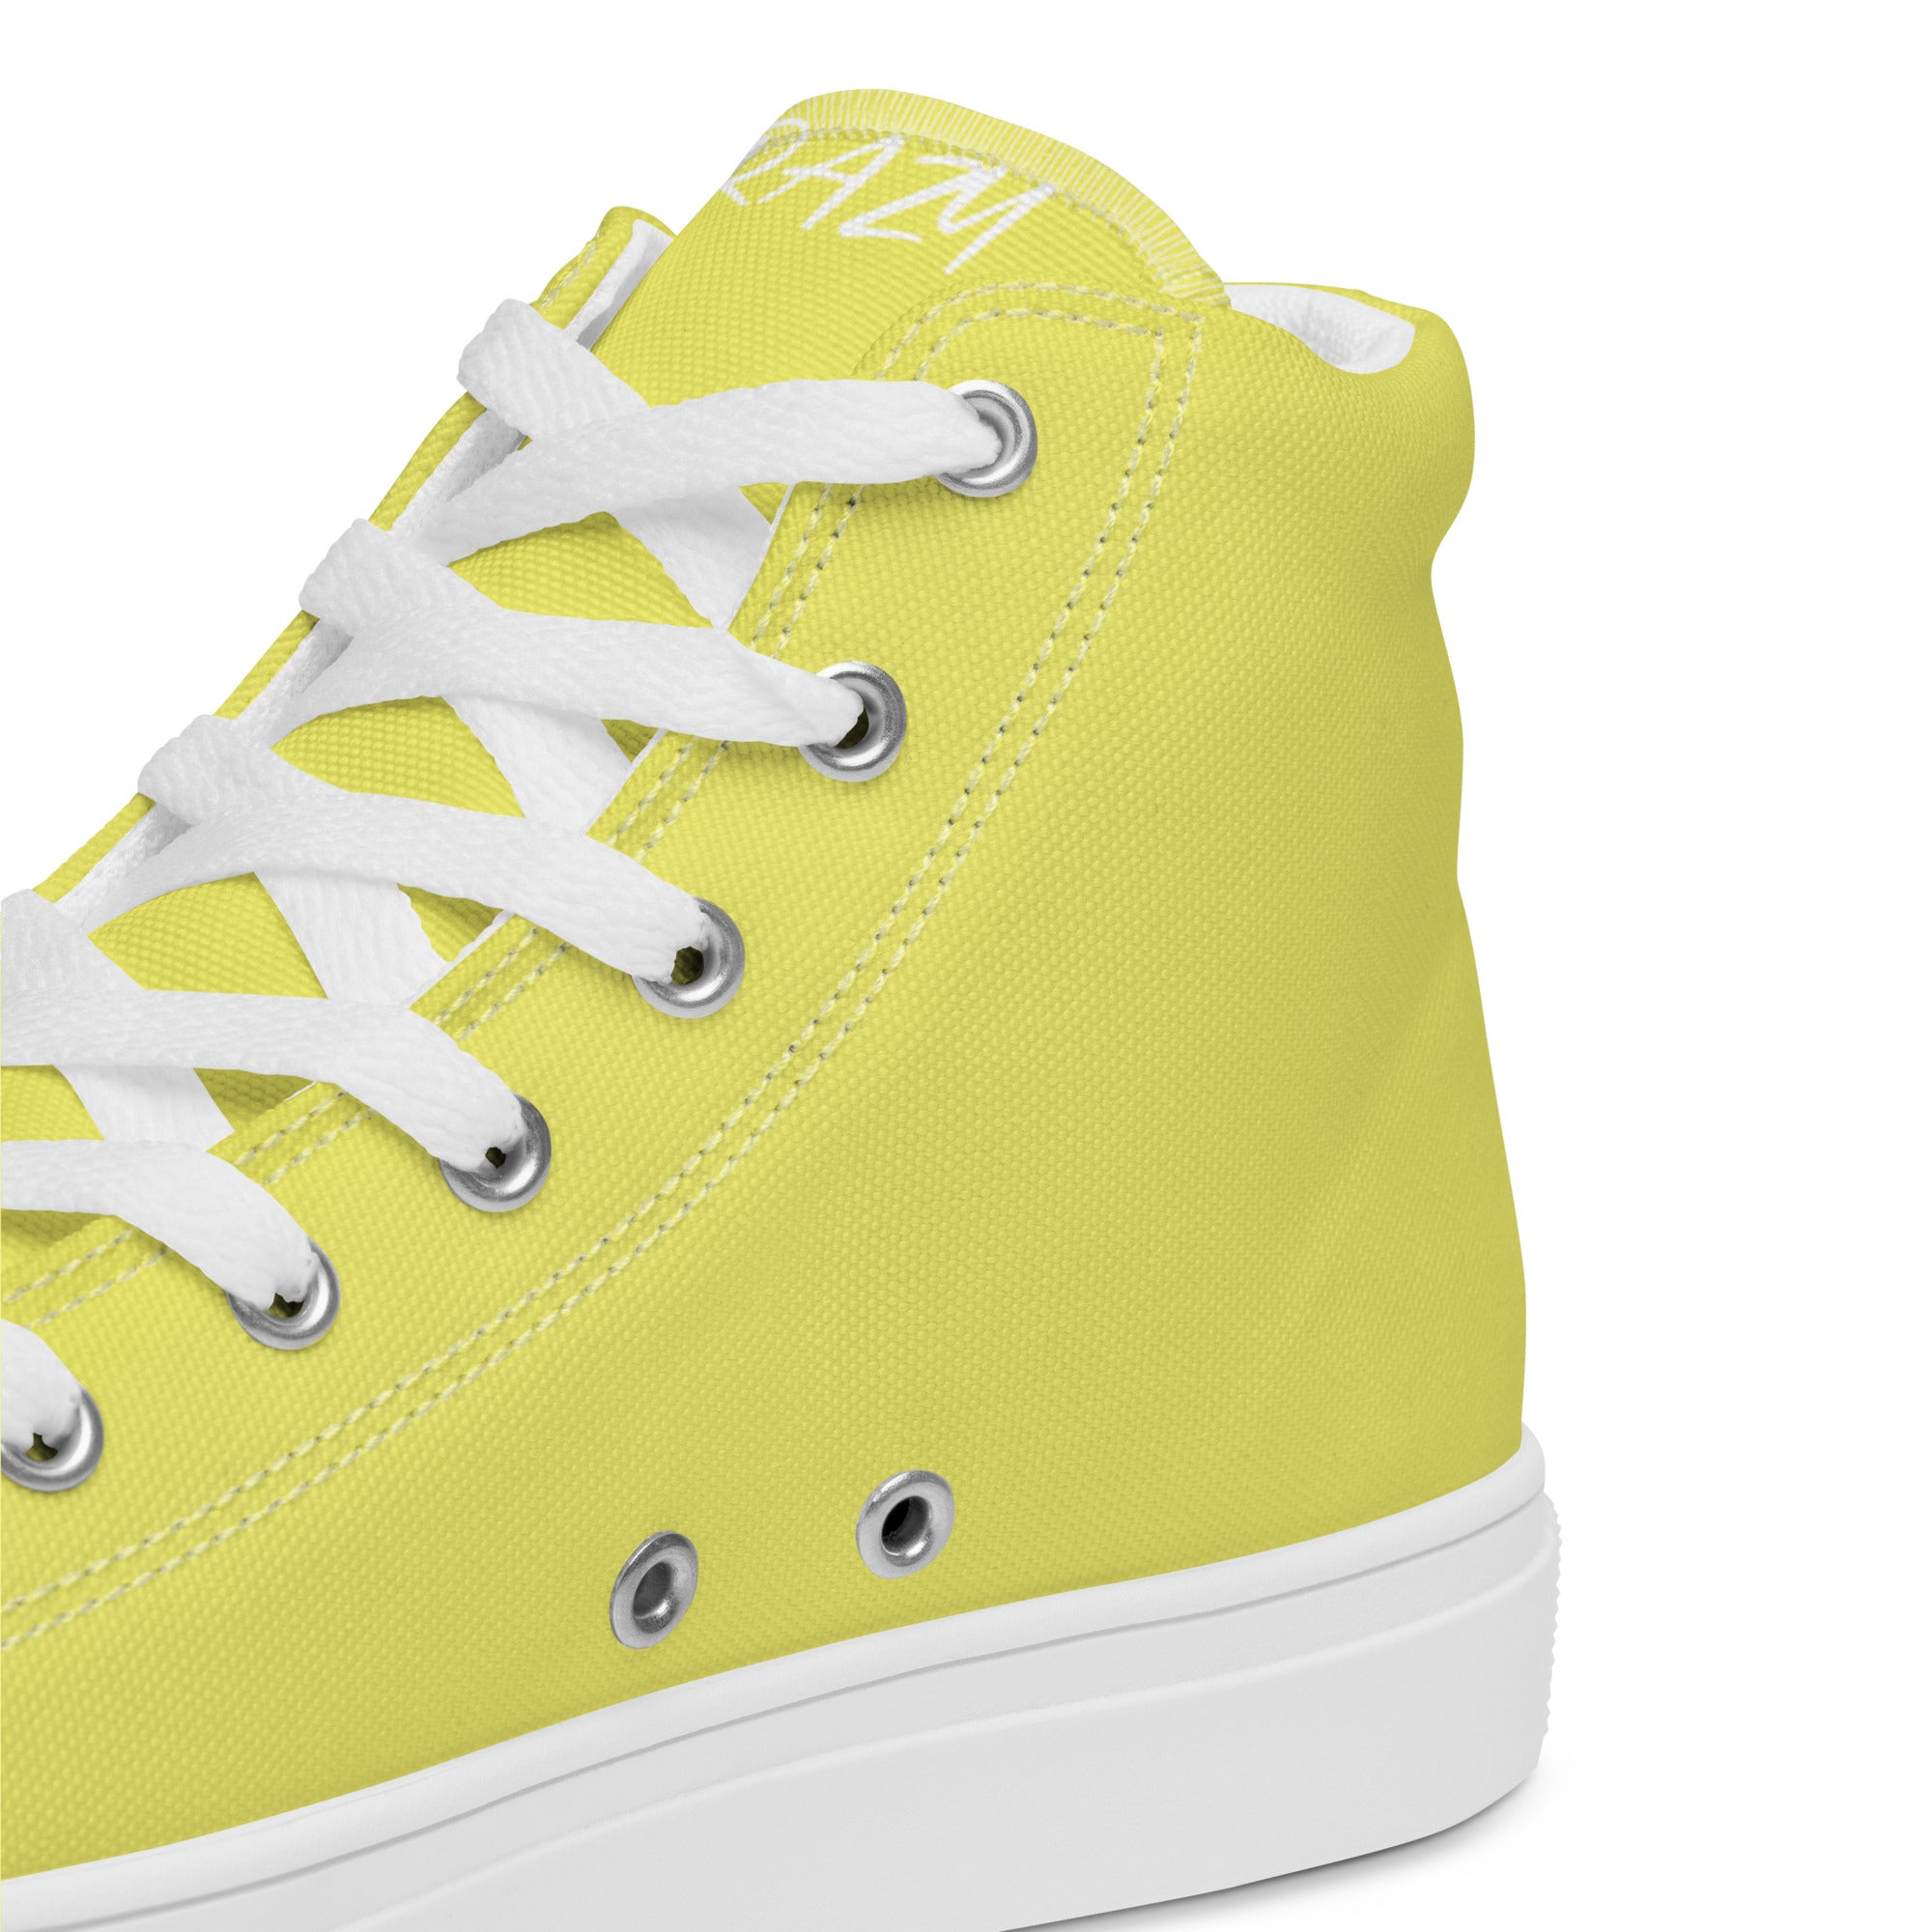 "SAY MY NAME" men's high yellow canvas sneakers